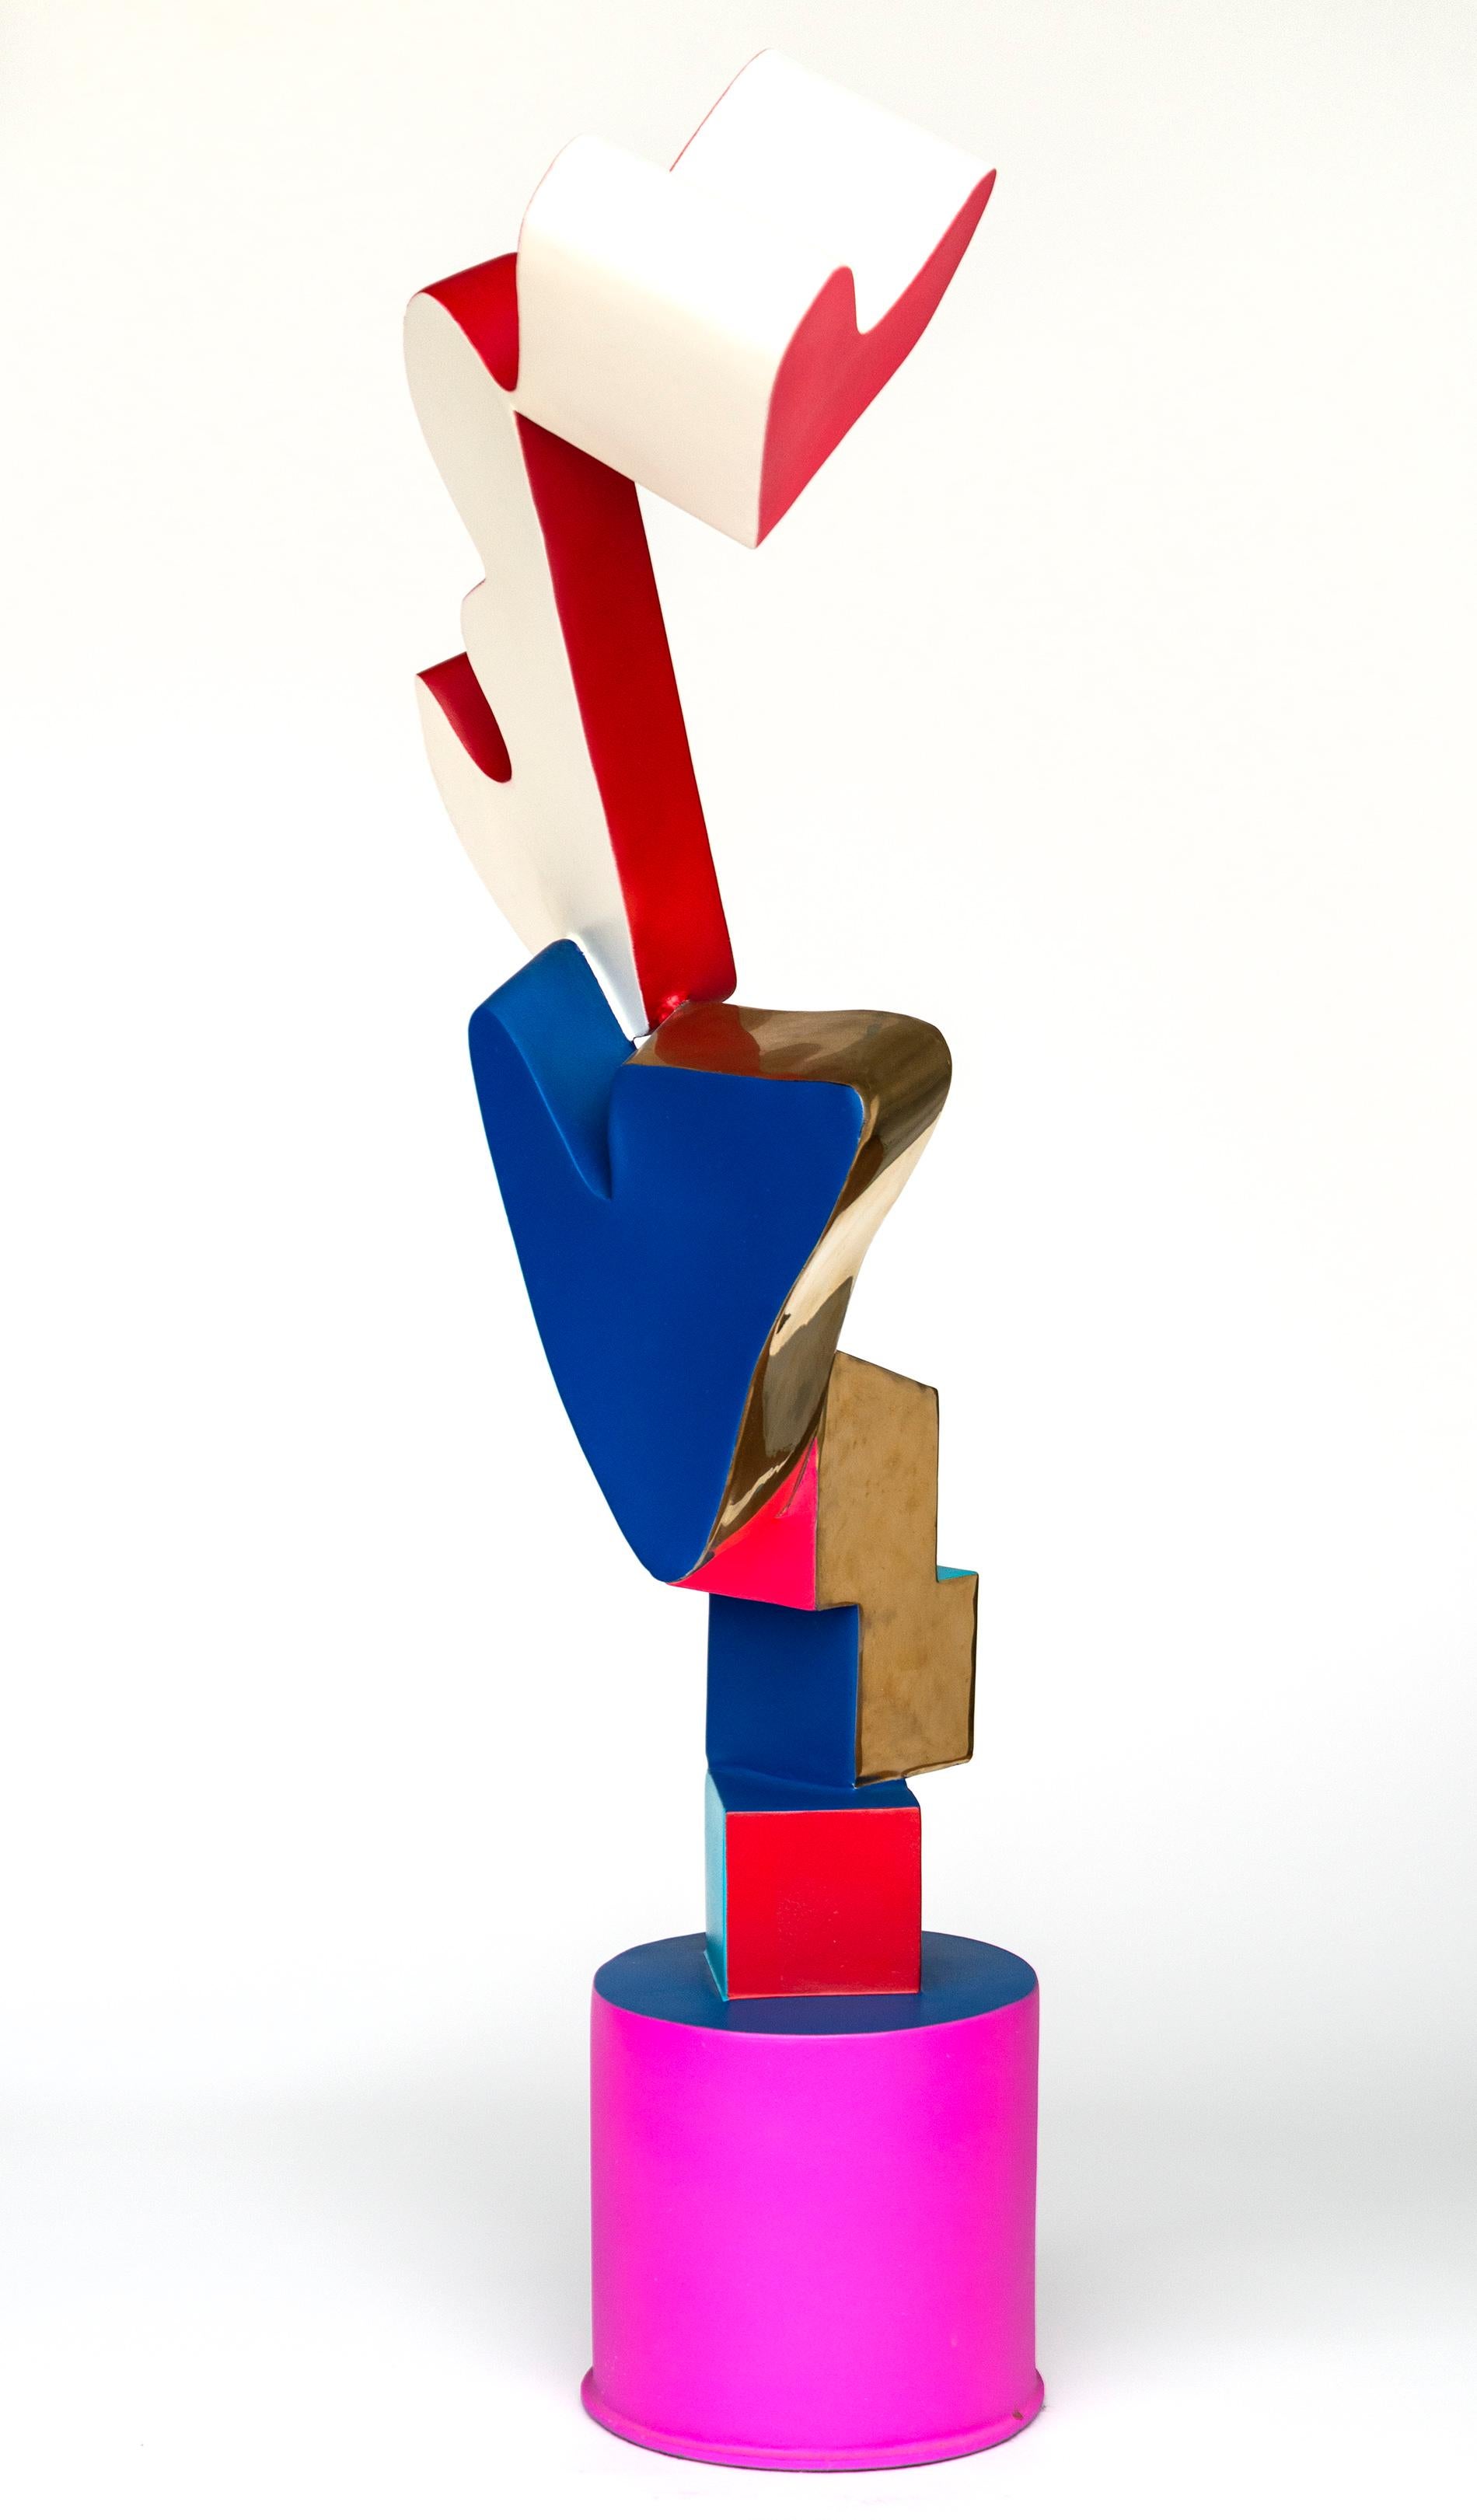 Swift - bright, colourful, abstract, pop art, painted stainless steel sculpture - Abstract Sculpture by Viktor Mitic